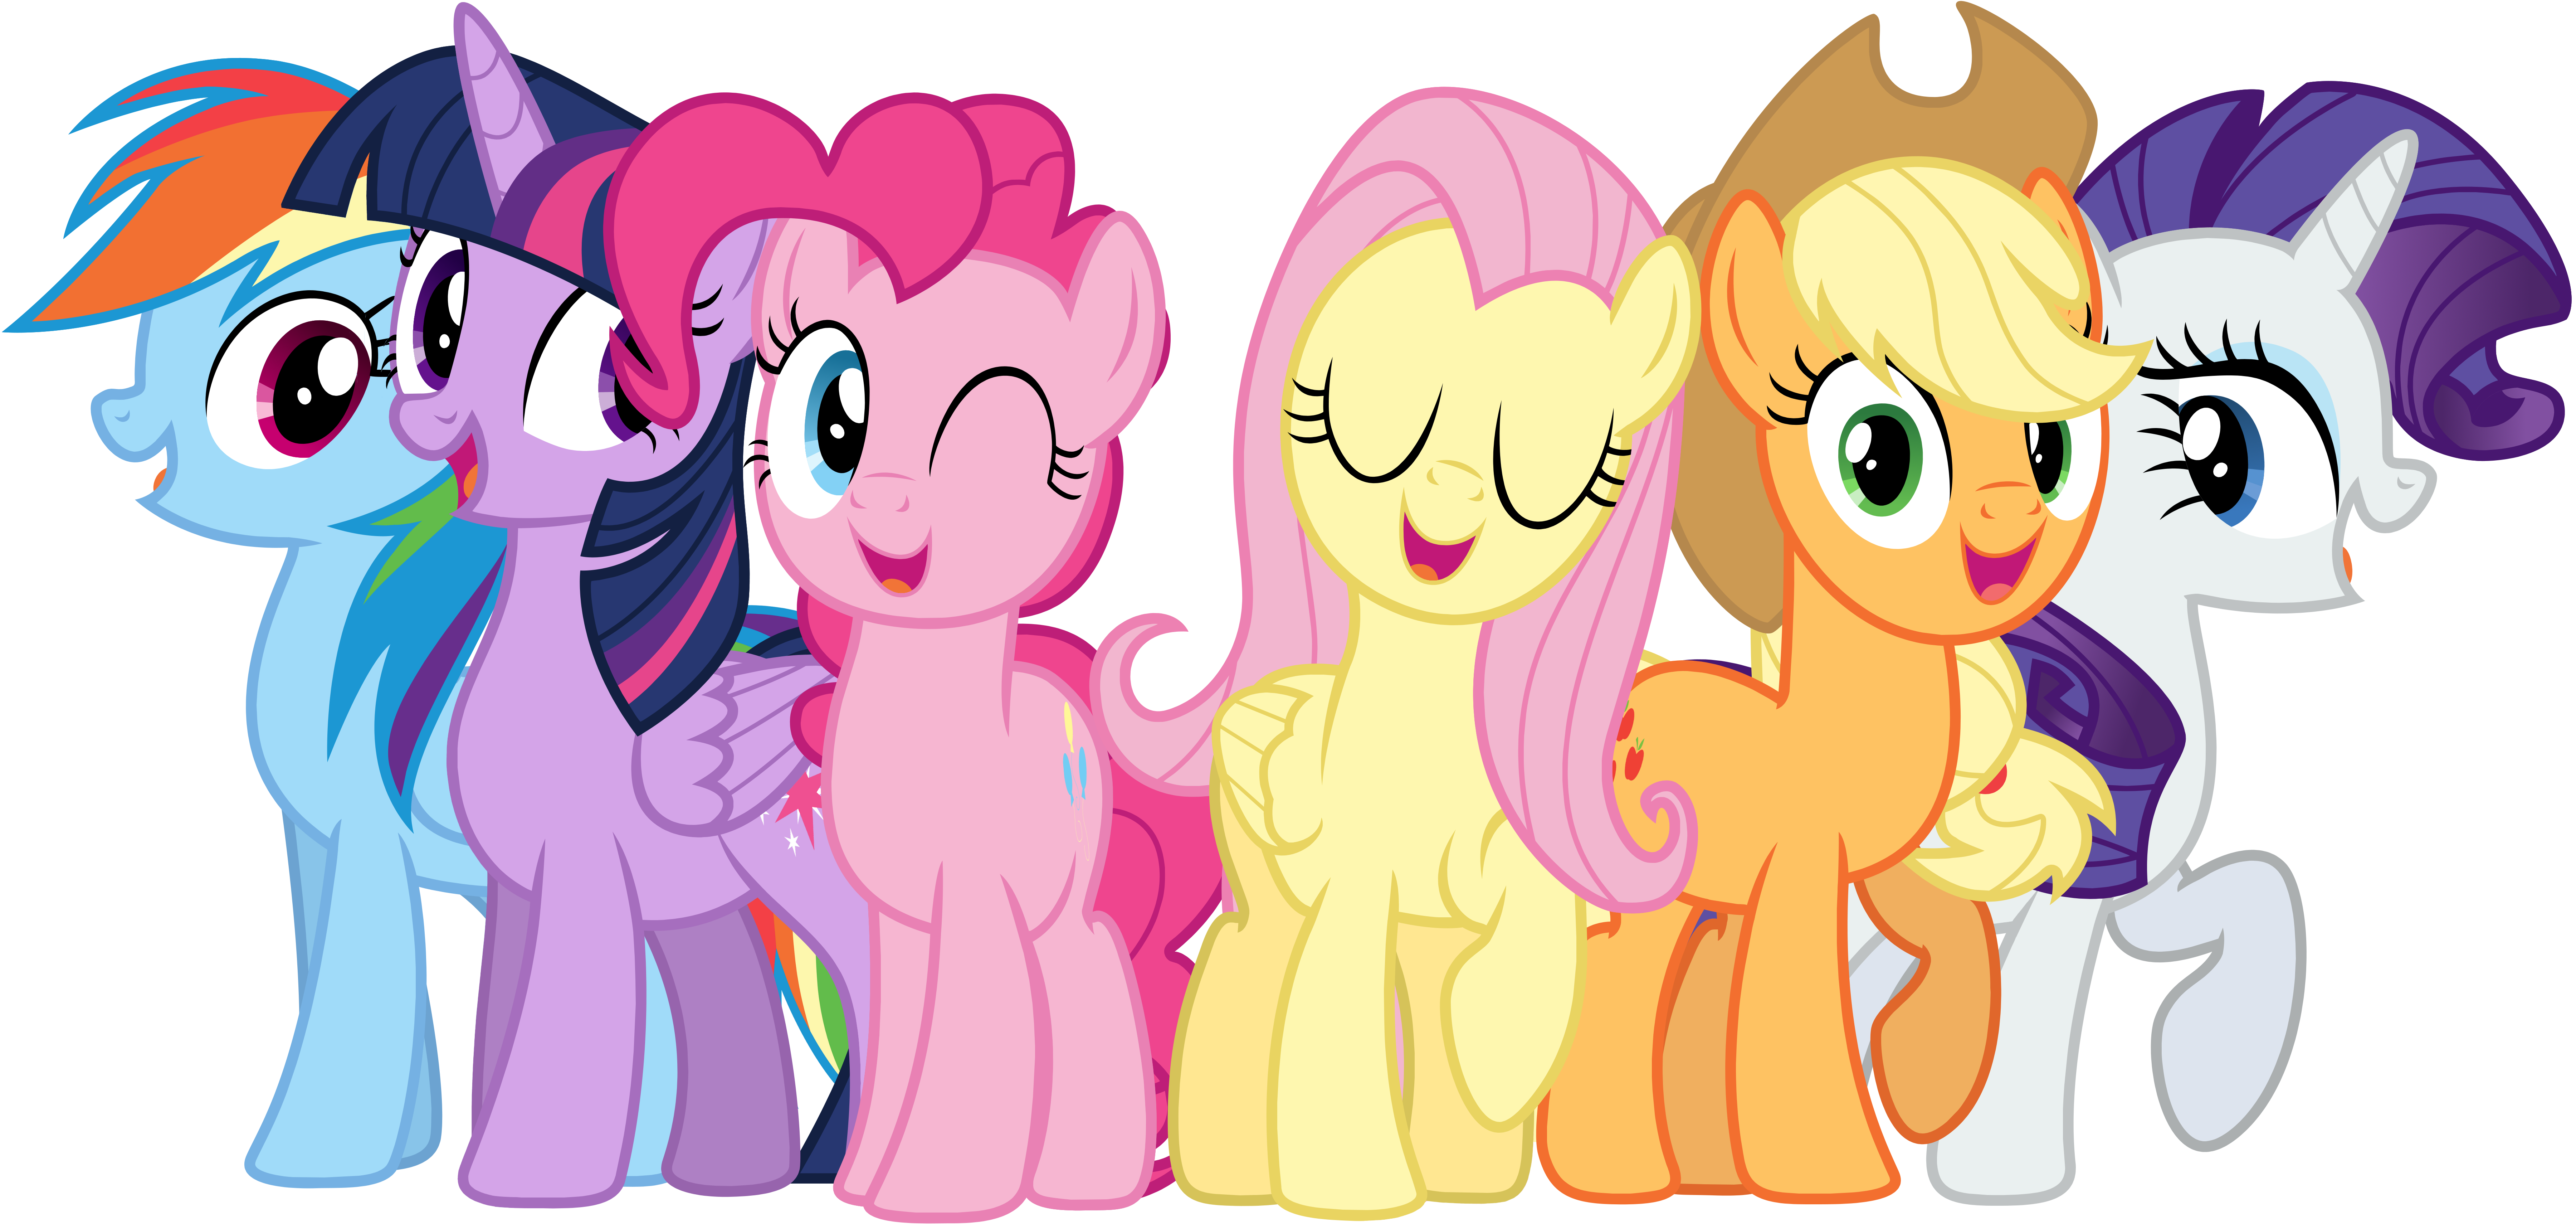 Six main protagonists from MLP:FIM